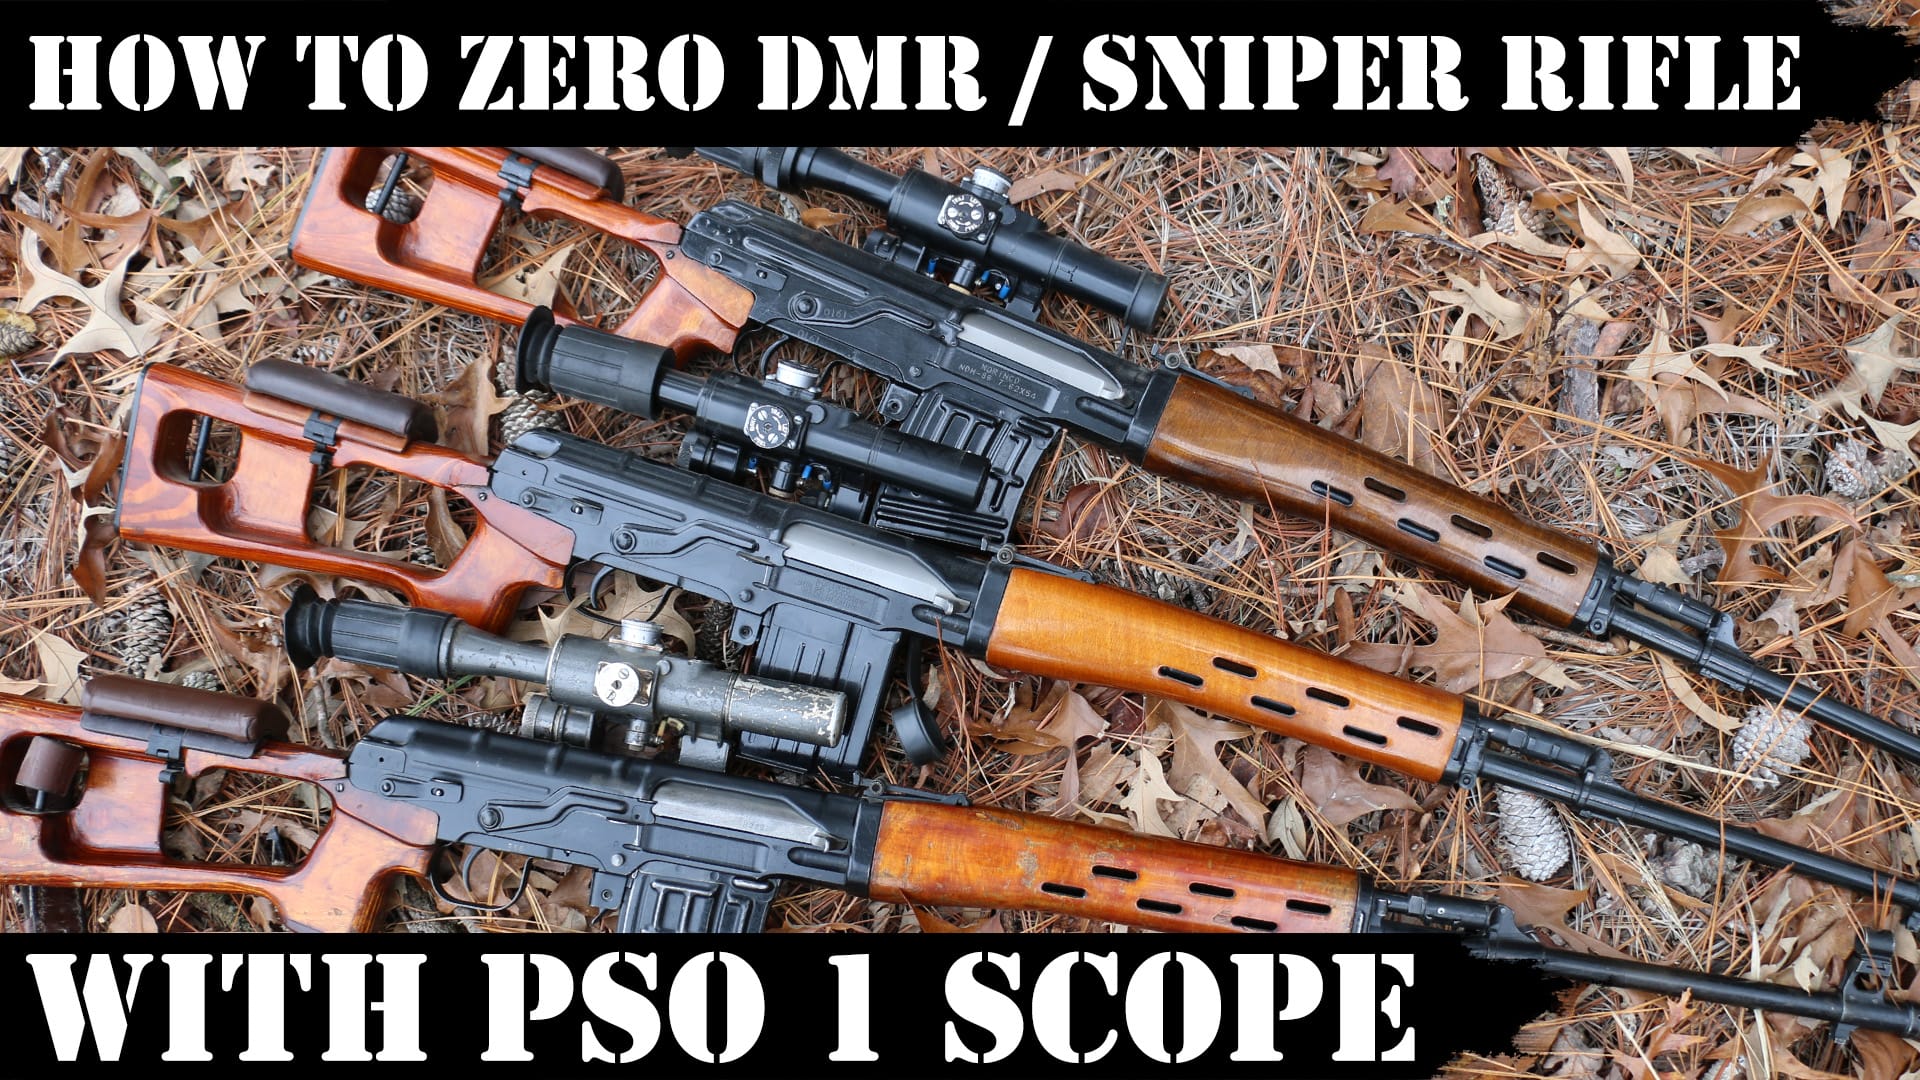 How to Zero “ComBlock” DMR / Sniper rifle with PSO 1 Scope! How to use PSO 1 scope!